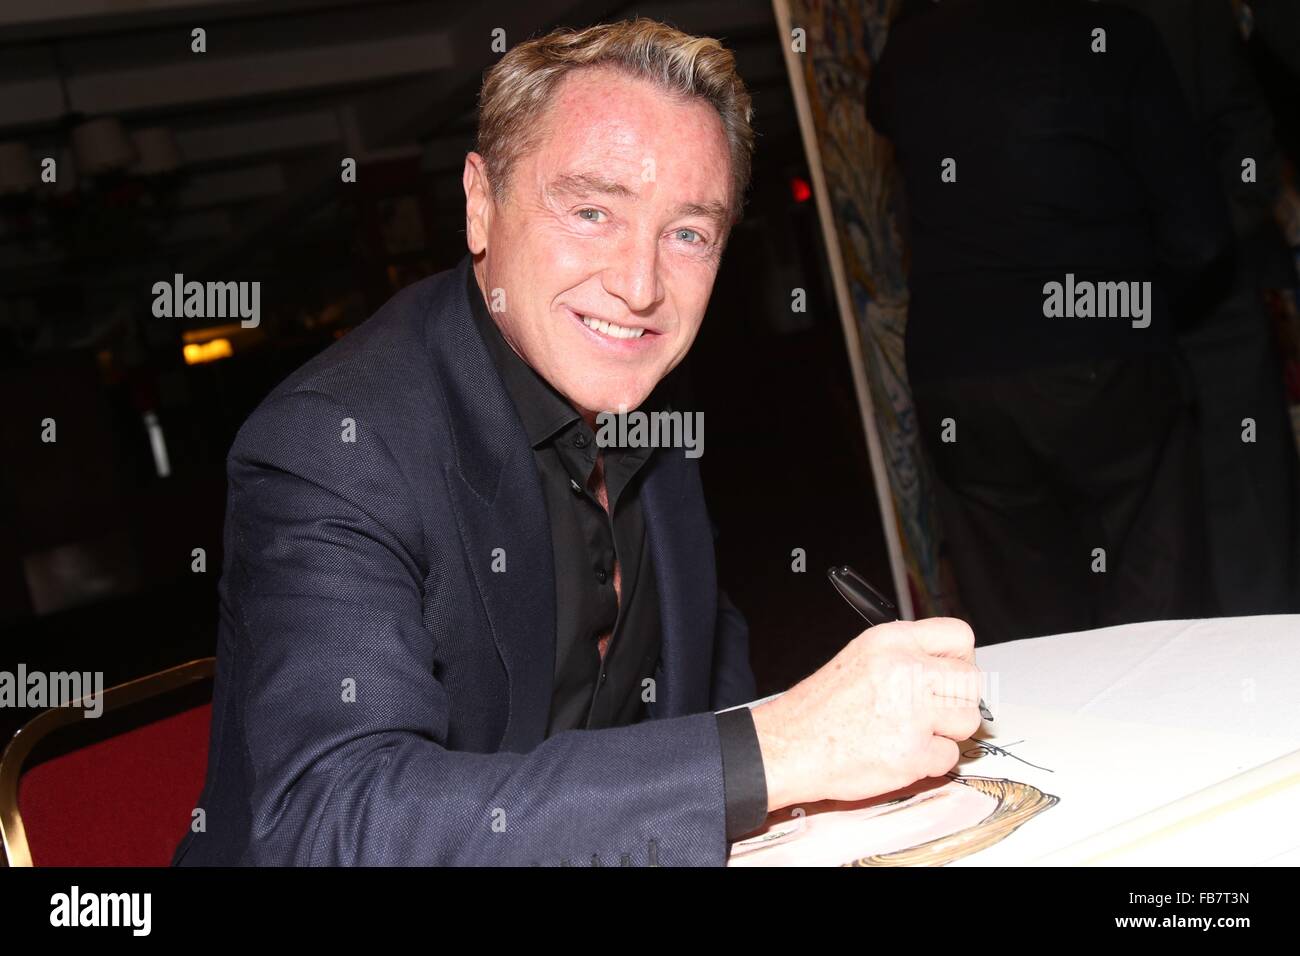 Michael Flatley portrait unveiling at Sardi's theatre district eatery  Featuring: Michael Flatley Where: New York City, New York, United States When: 11 Dec 2015 Stock Photo